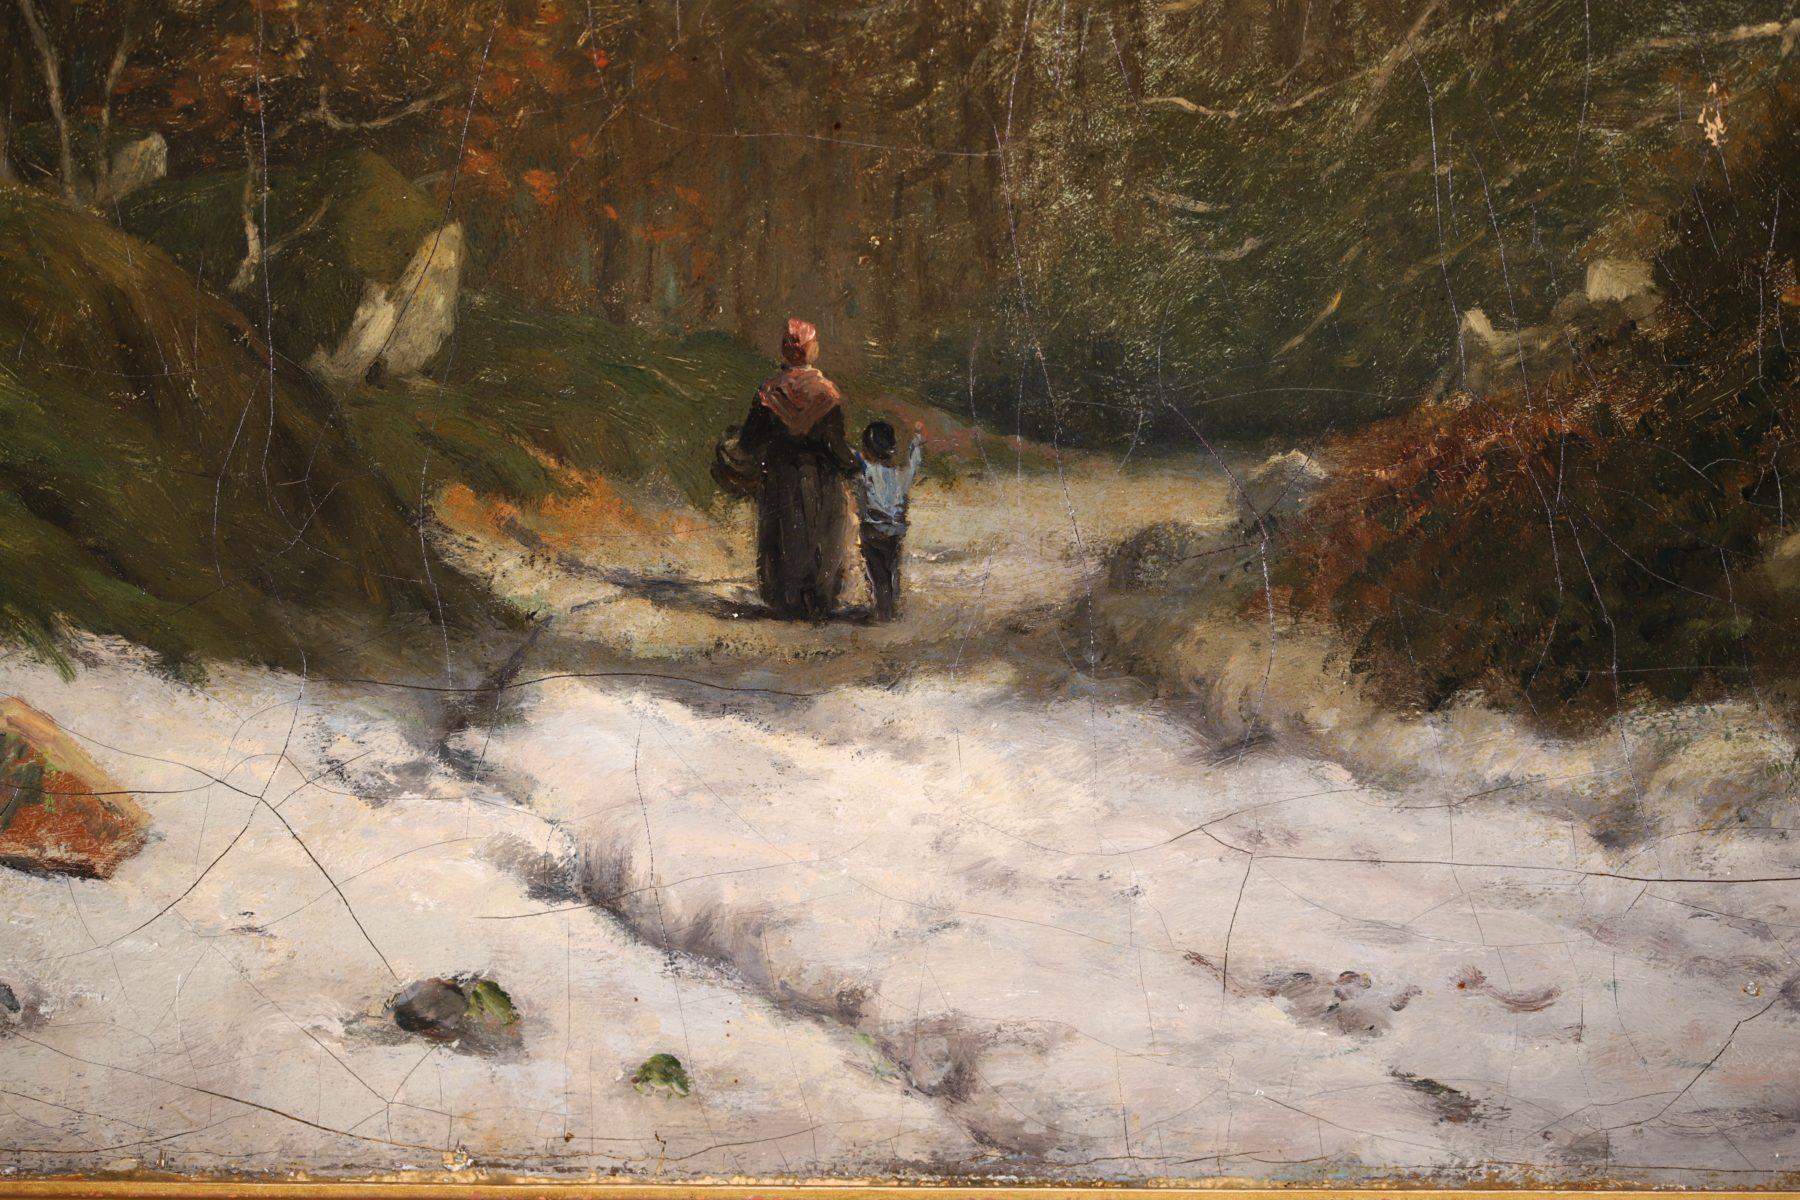 Signed figures in a landscape oil on canvas circa 1870 by French impressionist painter Victor Alfred Paul Vignon. The work depicts a woman carrying a basket with a young child beside her walking along a snowy path in a Fontainebleau Forest. This